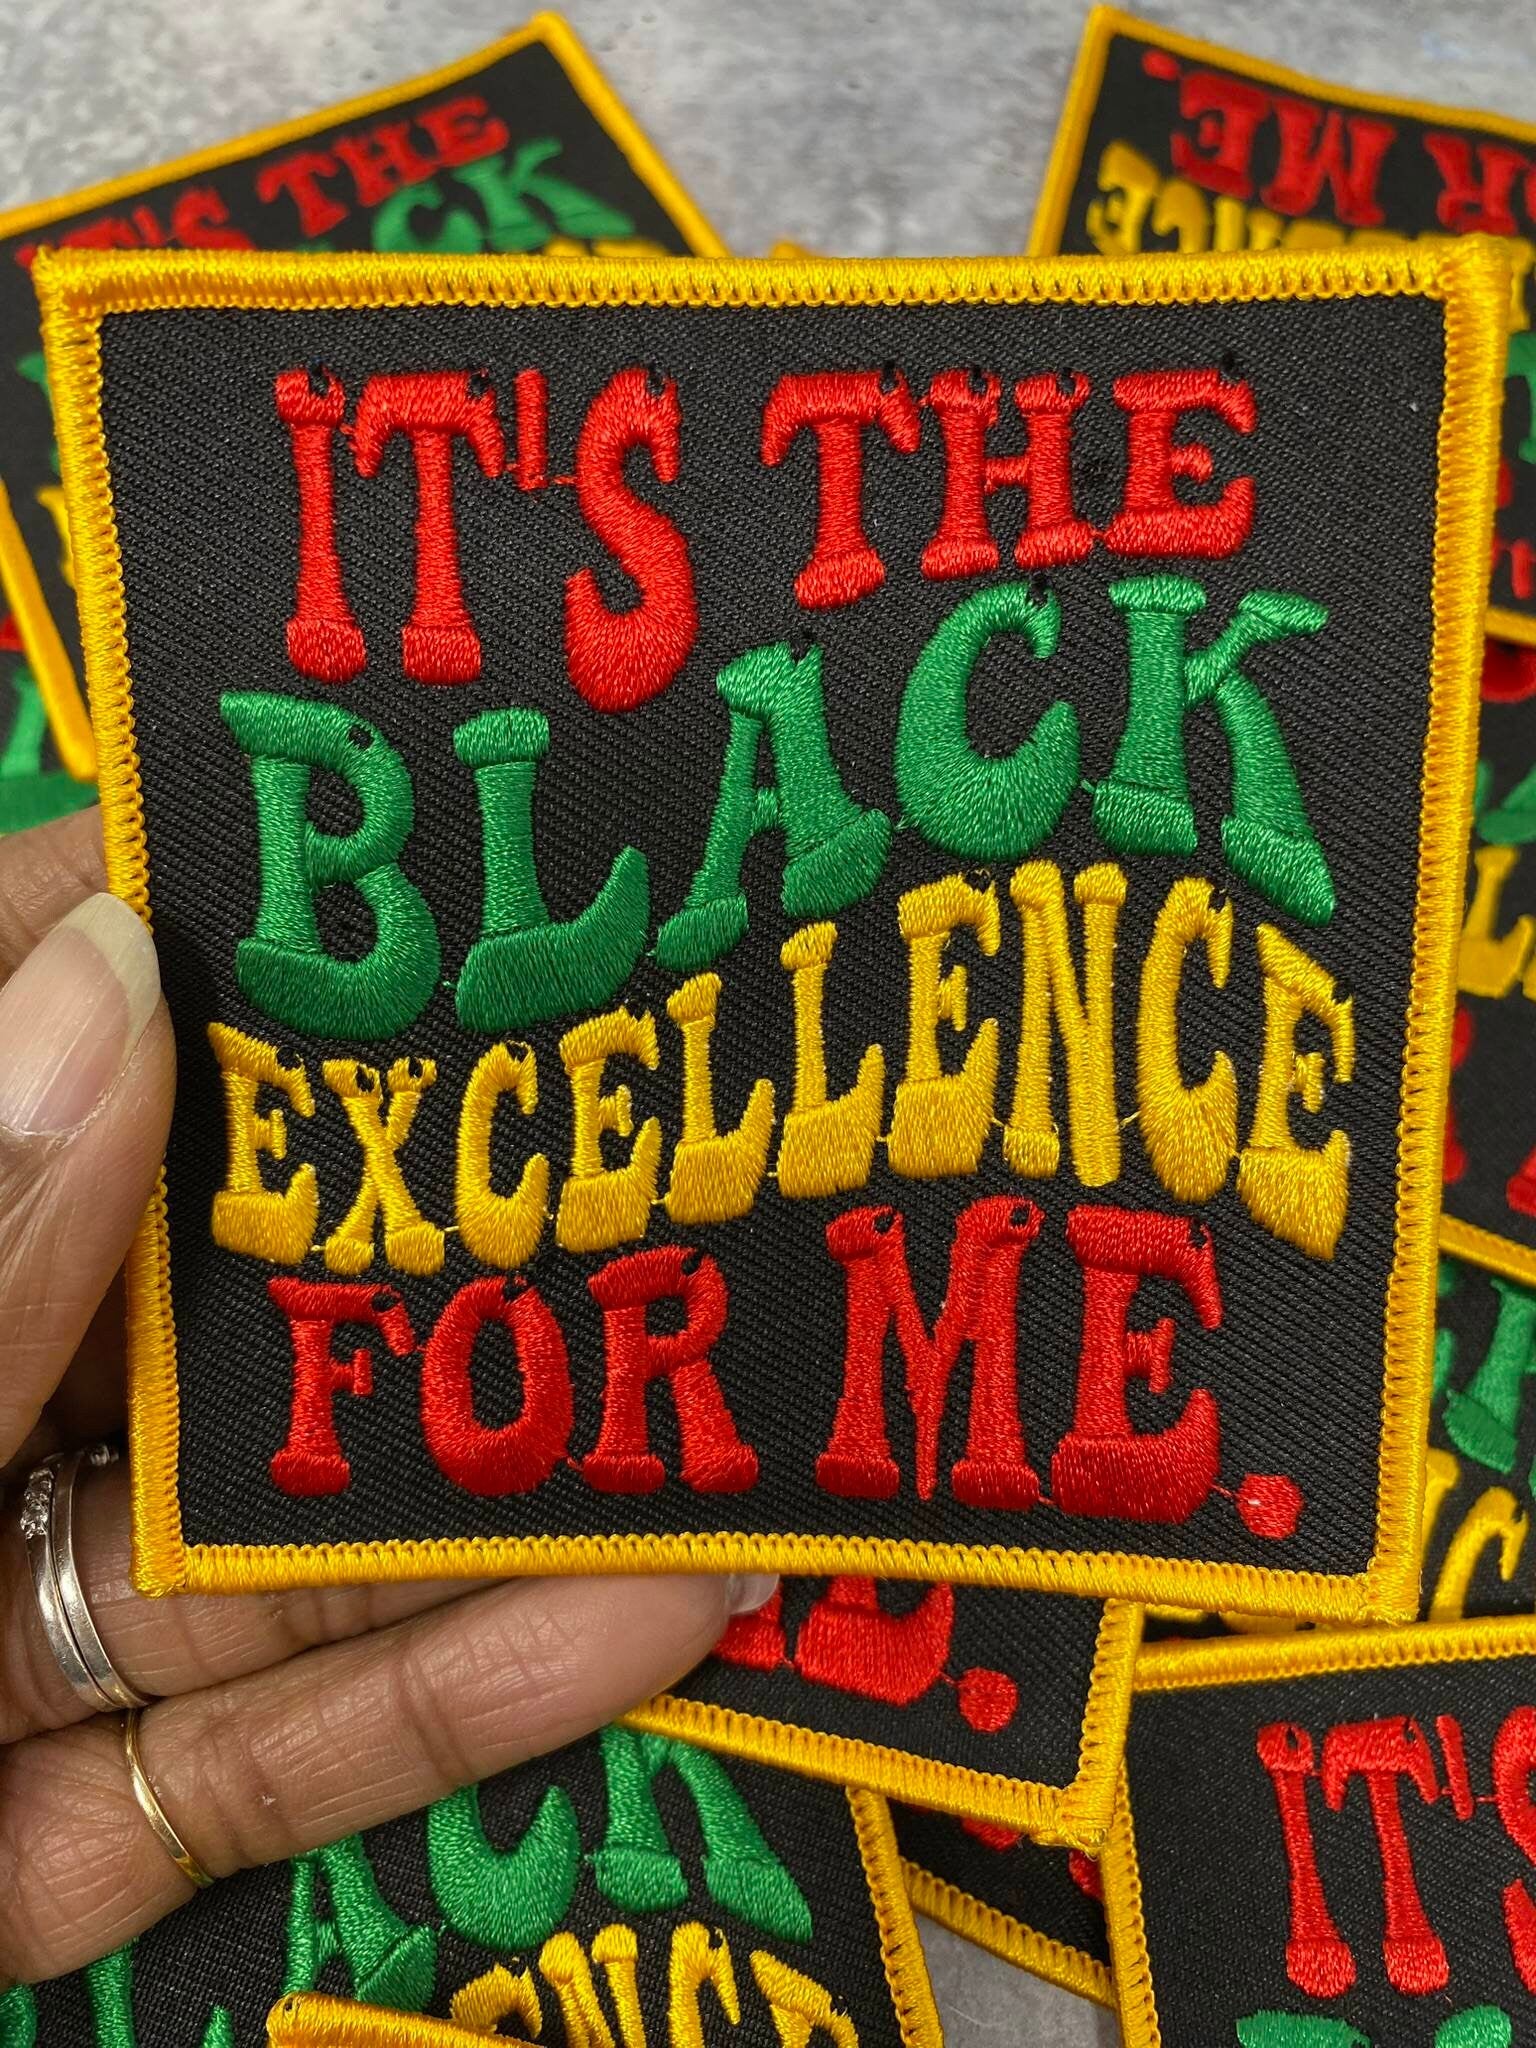 New, Colorful 1-pc, "It's the Black Excellence for Me" 3" Popular Patch, Iron-on Embroidered Patch; DIY Applique for Hats, Jackets, Crocs